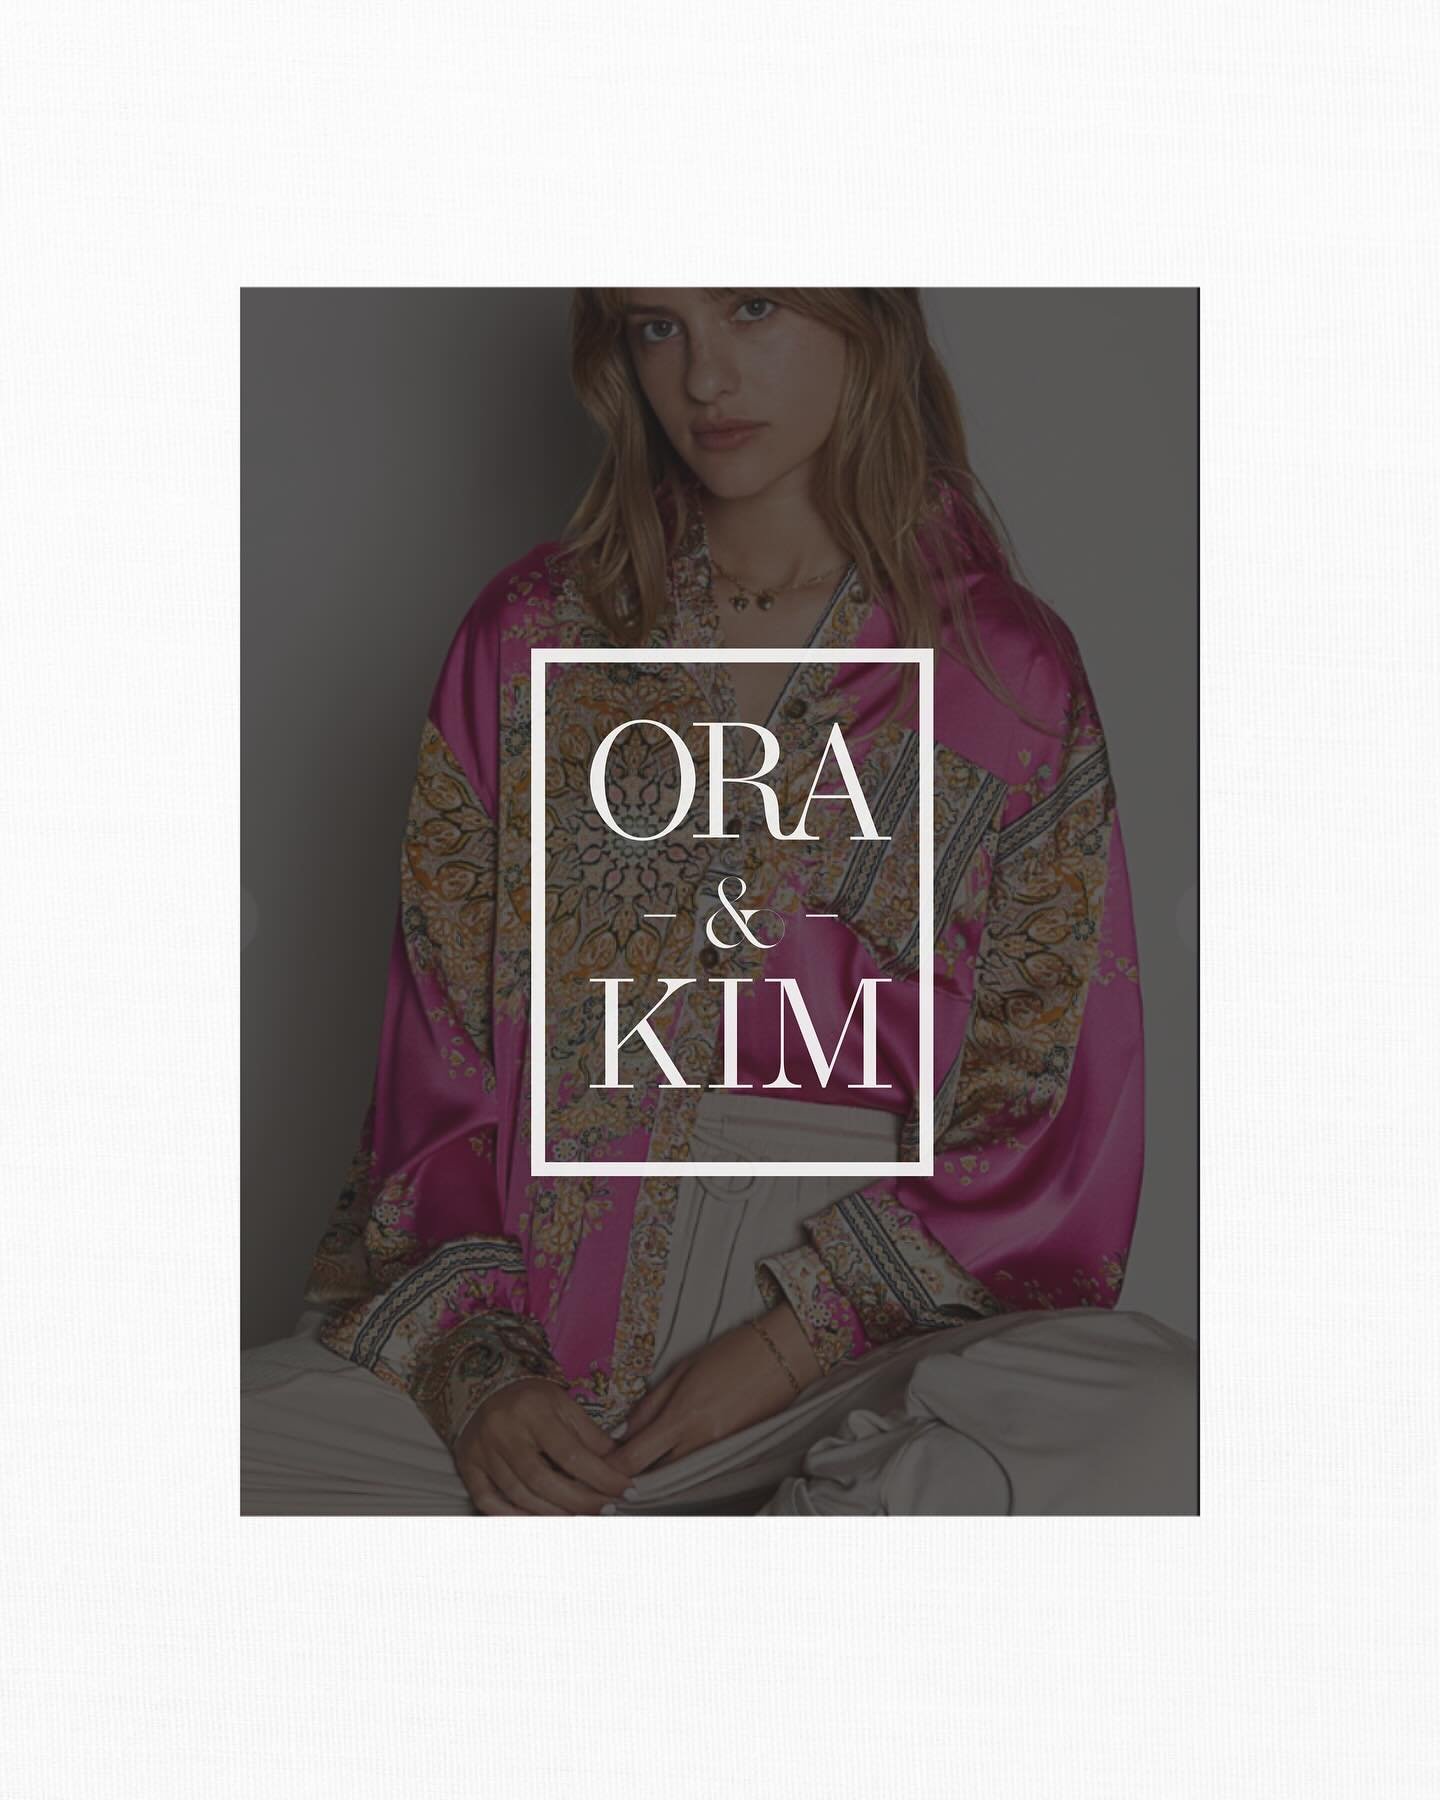 It&rsquo;s been a busy few weeks heading into summer. How are you?
What have I been up to? Working away on a few really exciting brand and website that are set to launch this spring.

I&rsquo;m sharing a brand concept design for Ora+Kim, a female led